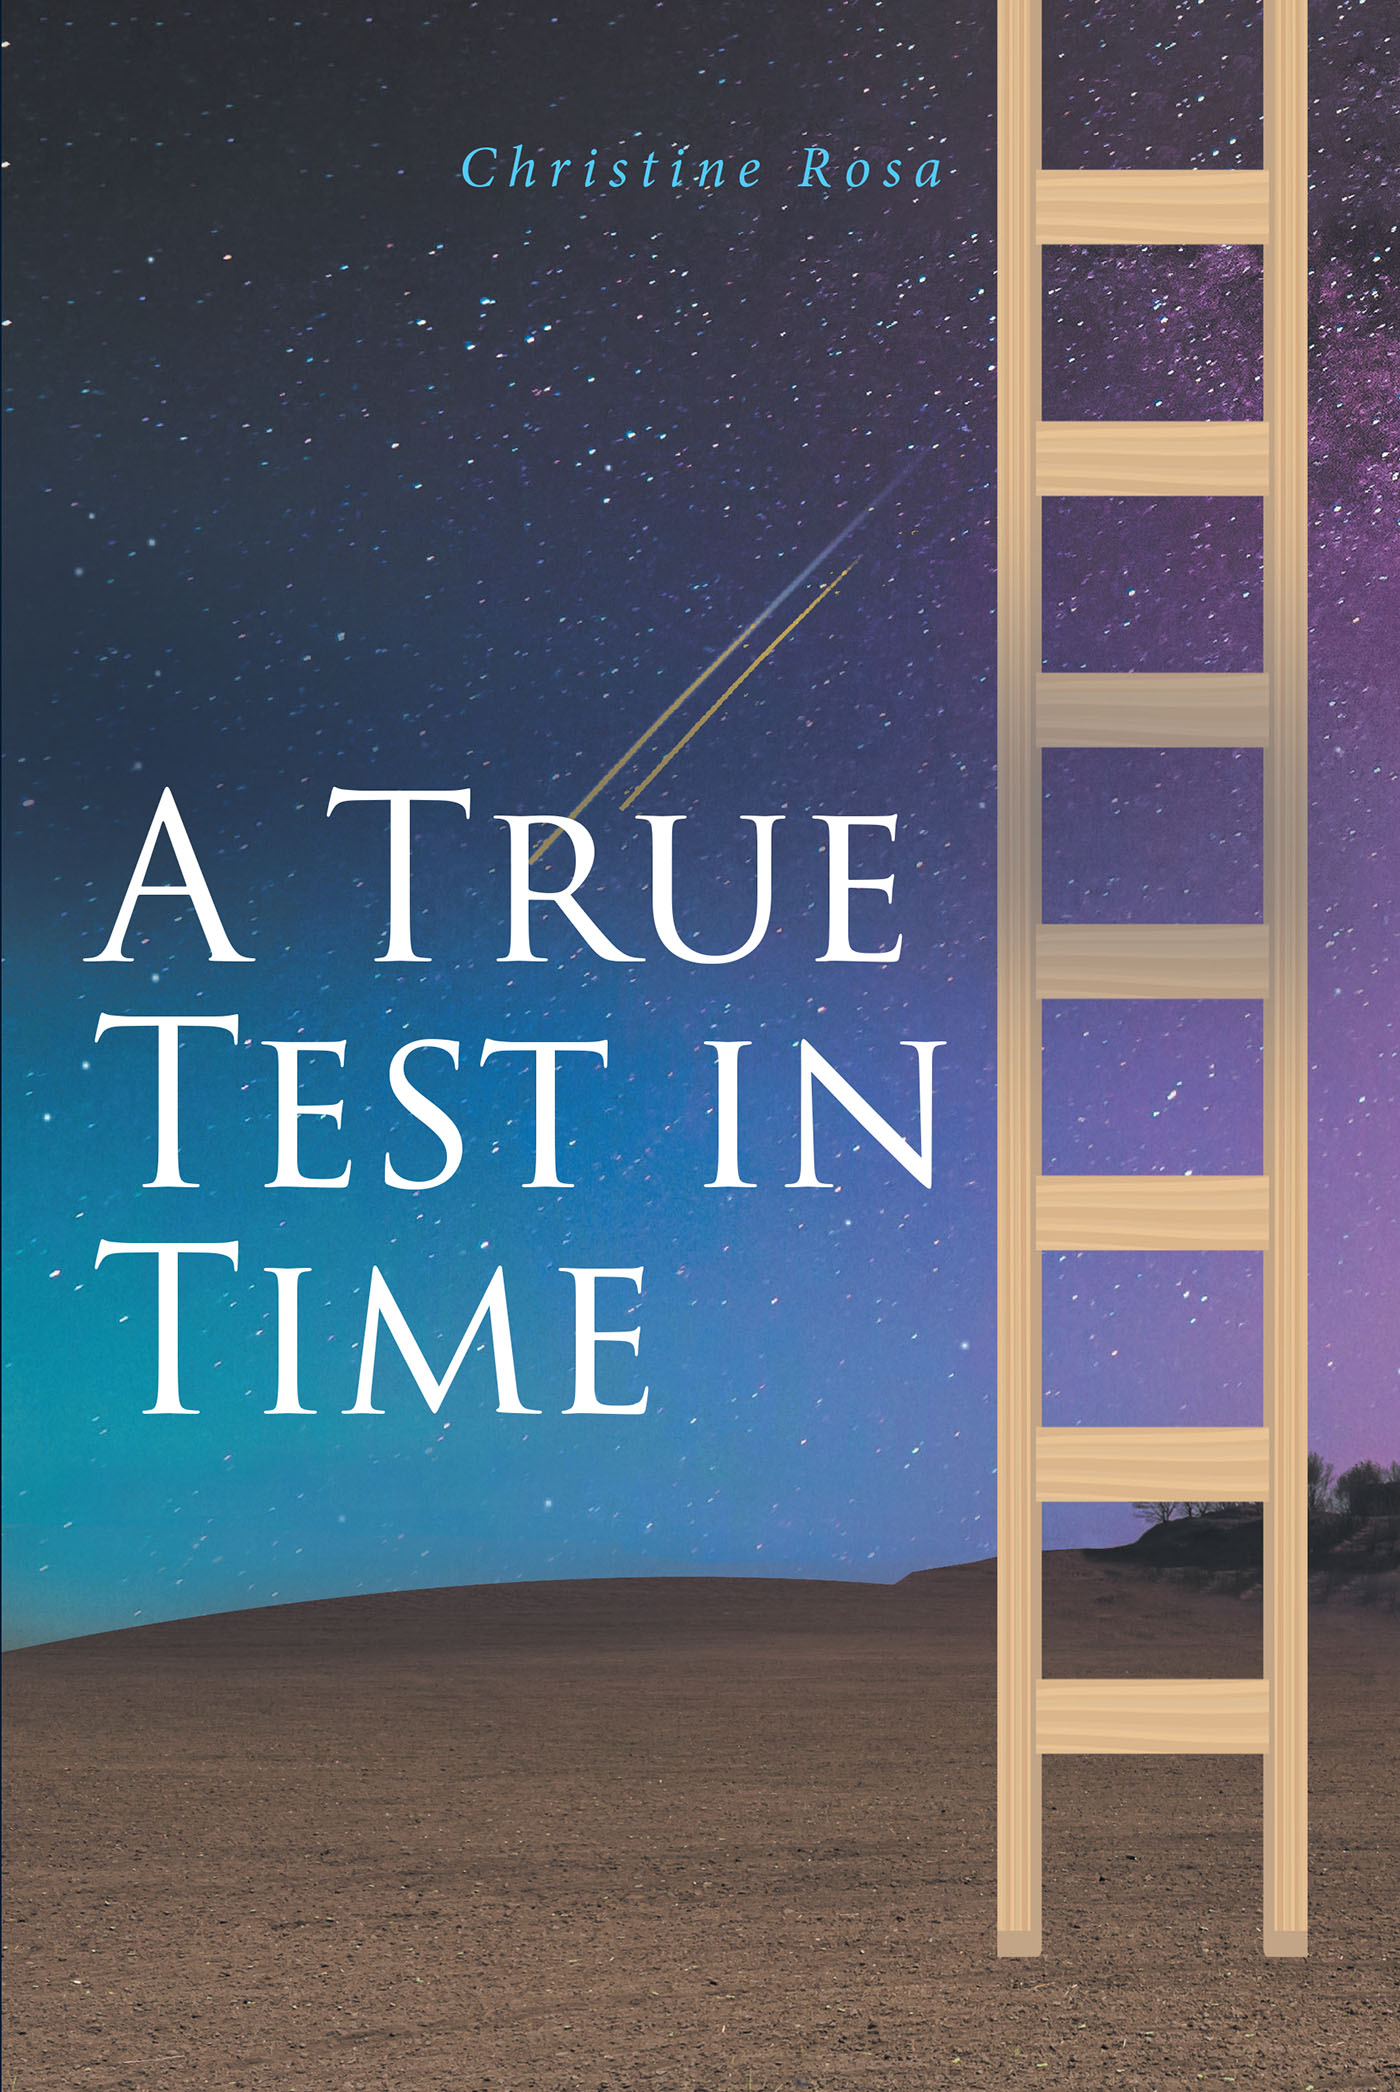 Christine Rosa’s Newly Released "A True Test in Time" is an Engaging Balance of Personal Memoir and Message of Encouragement in Faith